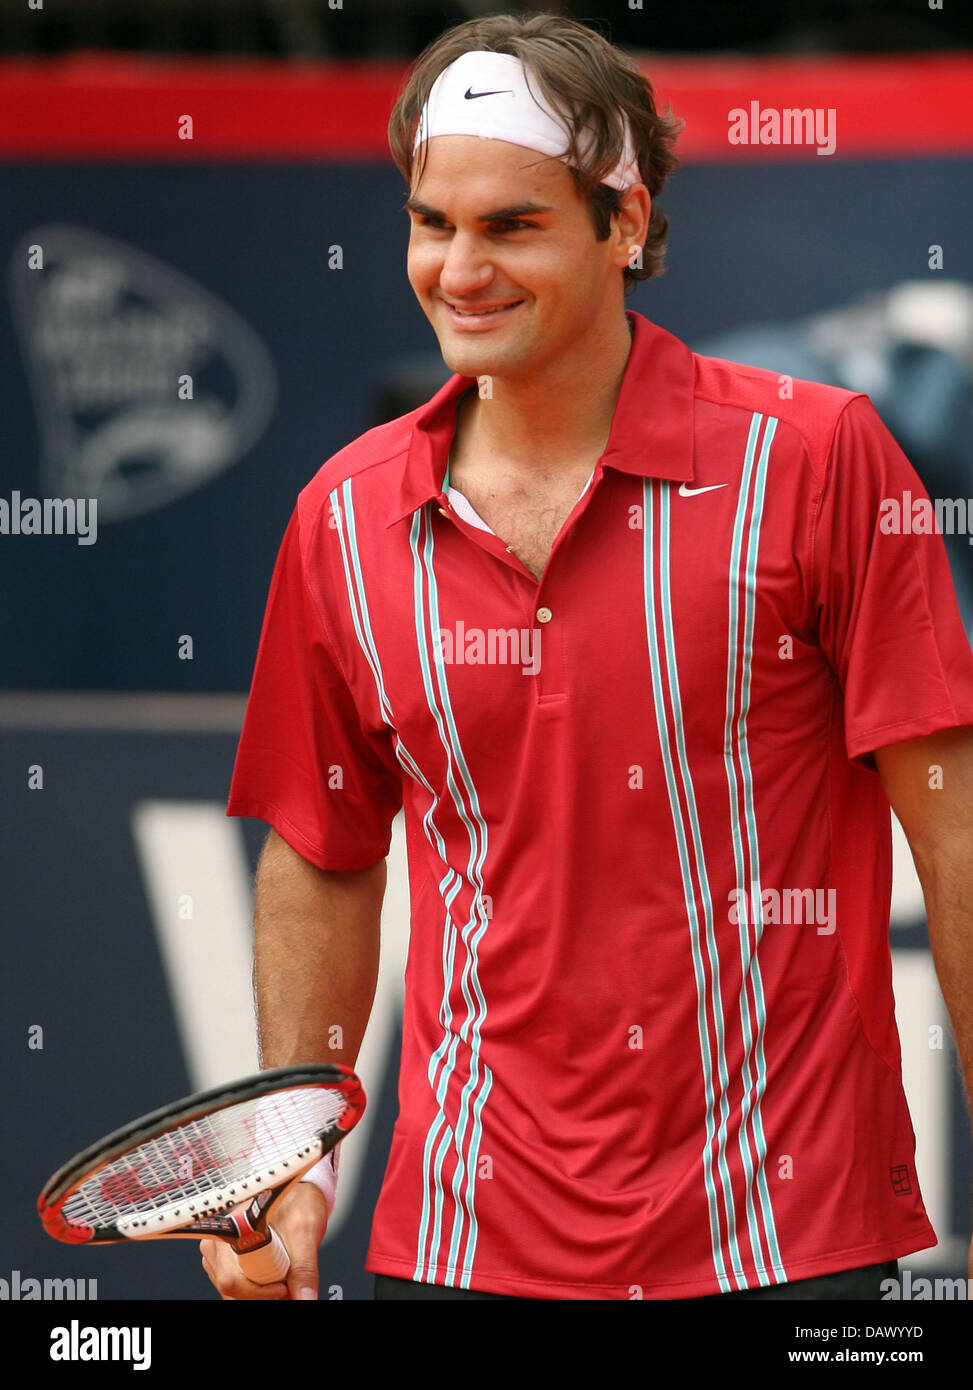 Swiss tennis pro Roger Federer smiles in his quarter final match against  Spanish David Ferrer at the ATP Tennis Masters at 'Rothenbaum' stadium in  Hamburg, Germany, 18 May 2007. Federer defeated Ferrer